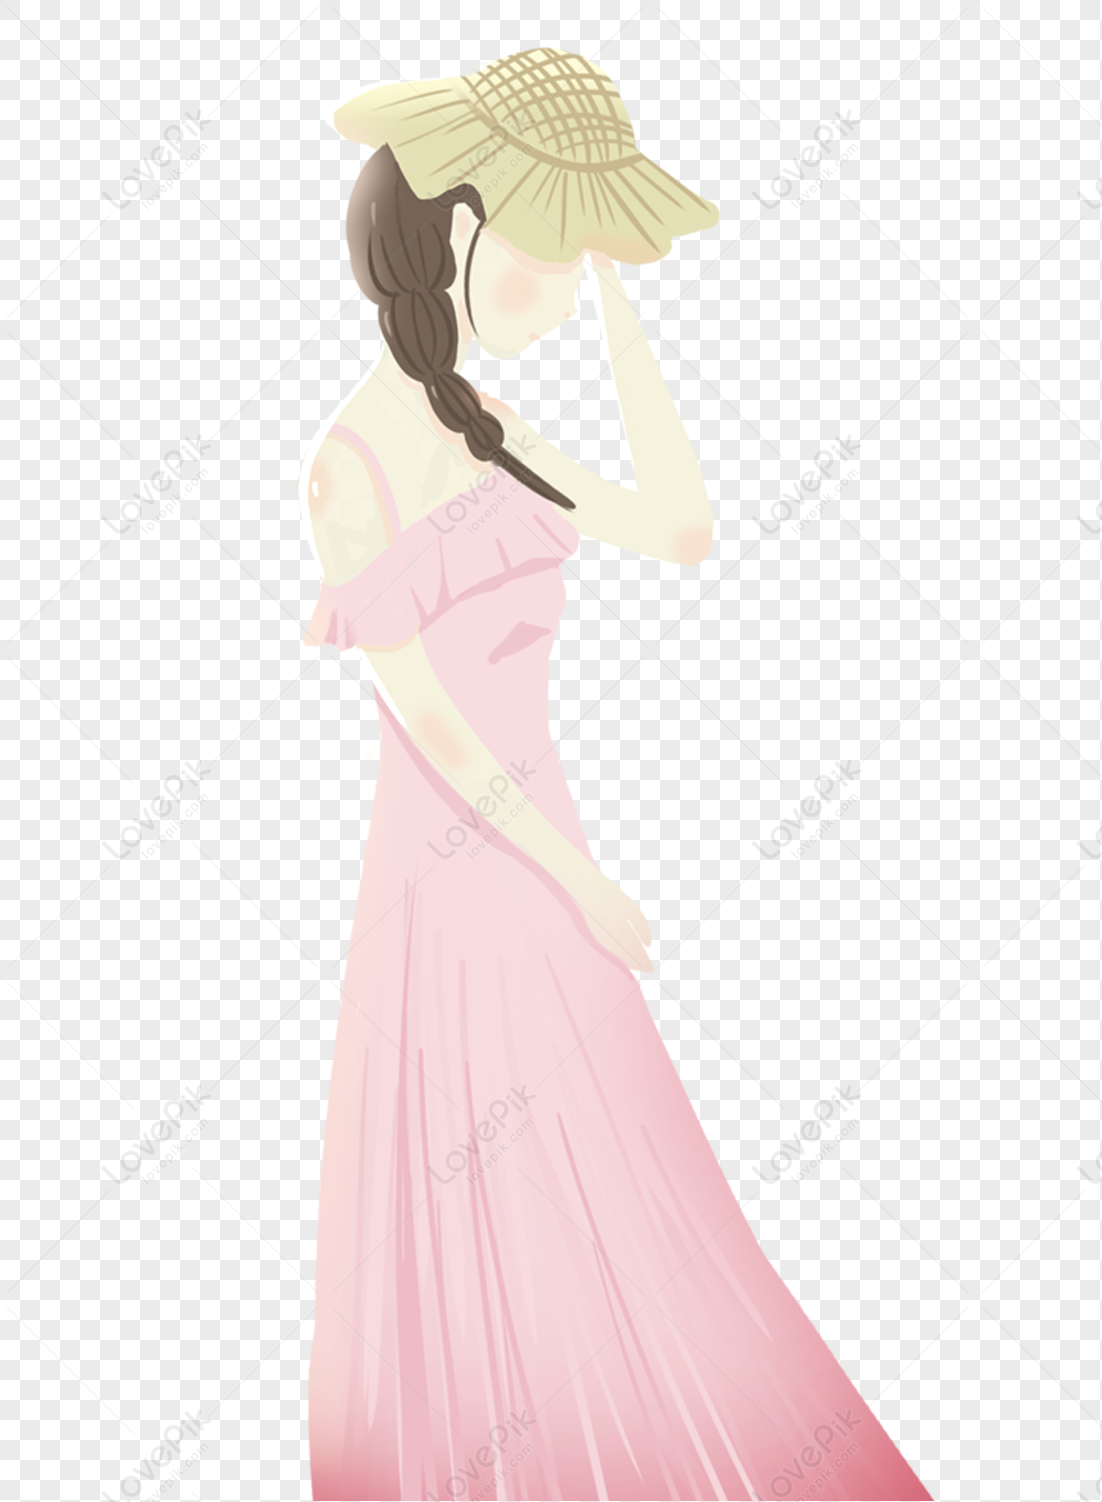 A Girl In A Skirt PNG White Transparent And Clipart Image For Free ...